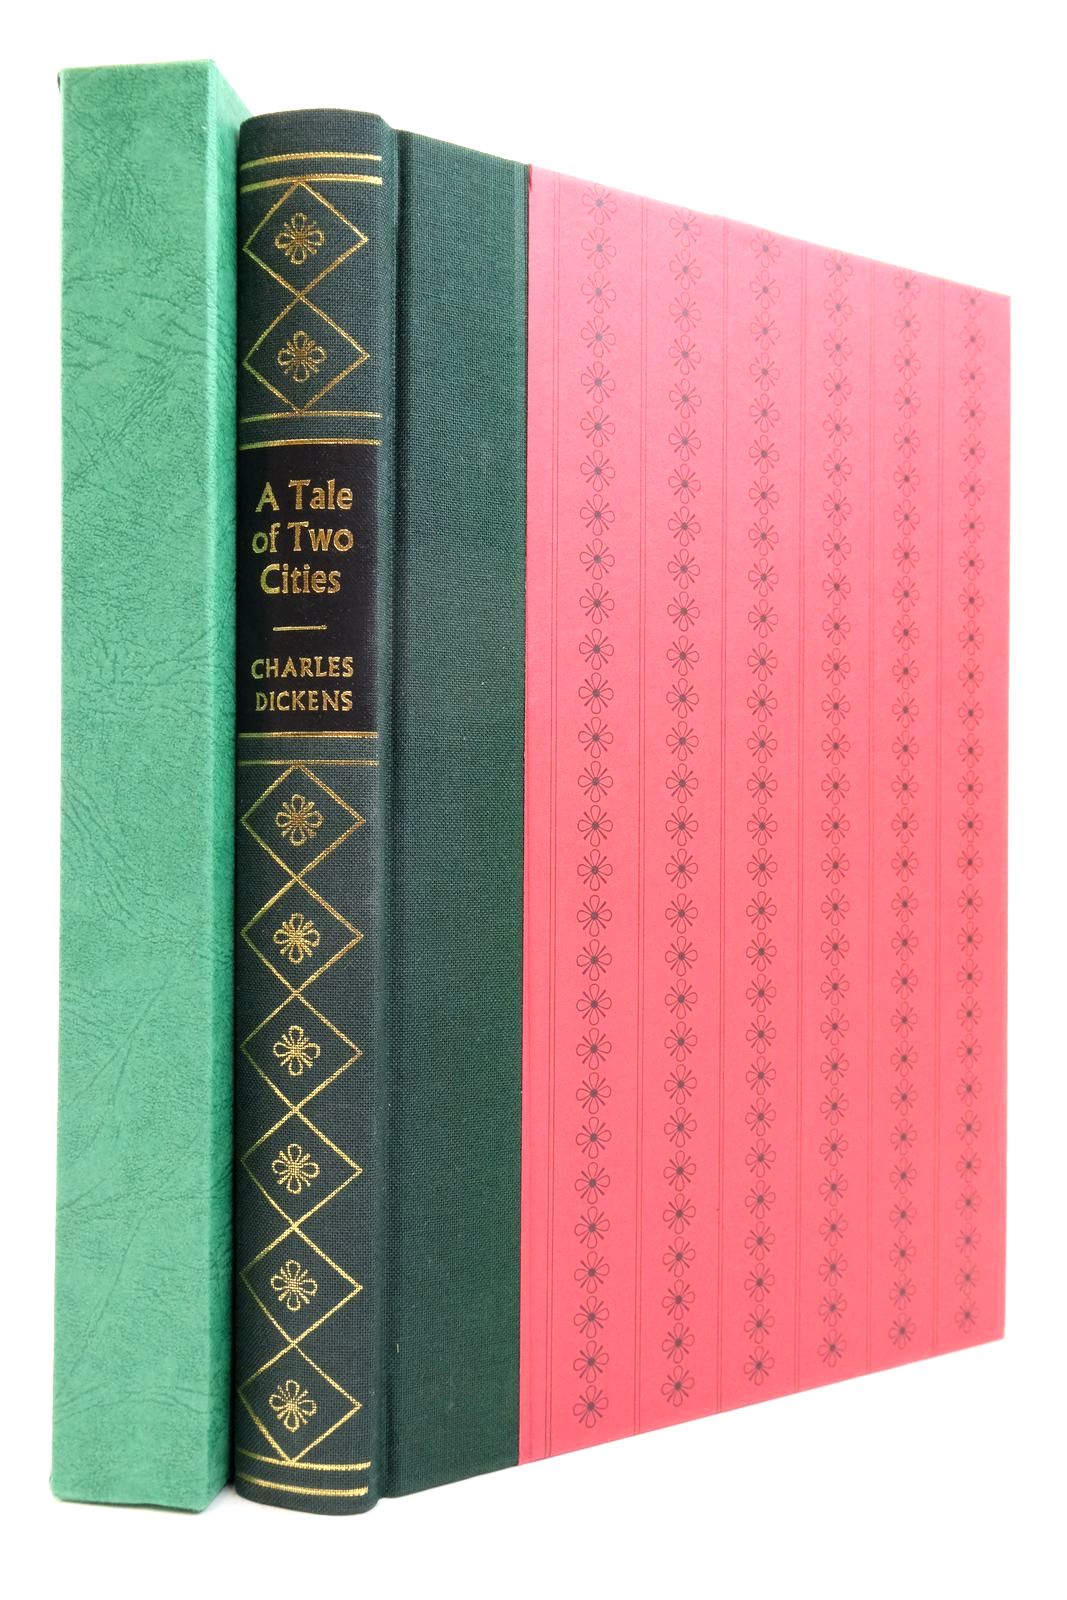 Photo of A TALE OF TWO CITIES written by Dickens, Charles illustrated by Keeping, Charles published by Folio Society (STOCK CODE: 2138524)  for sale by Stella & Rose's Books